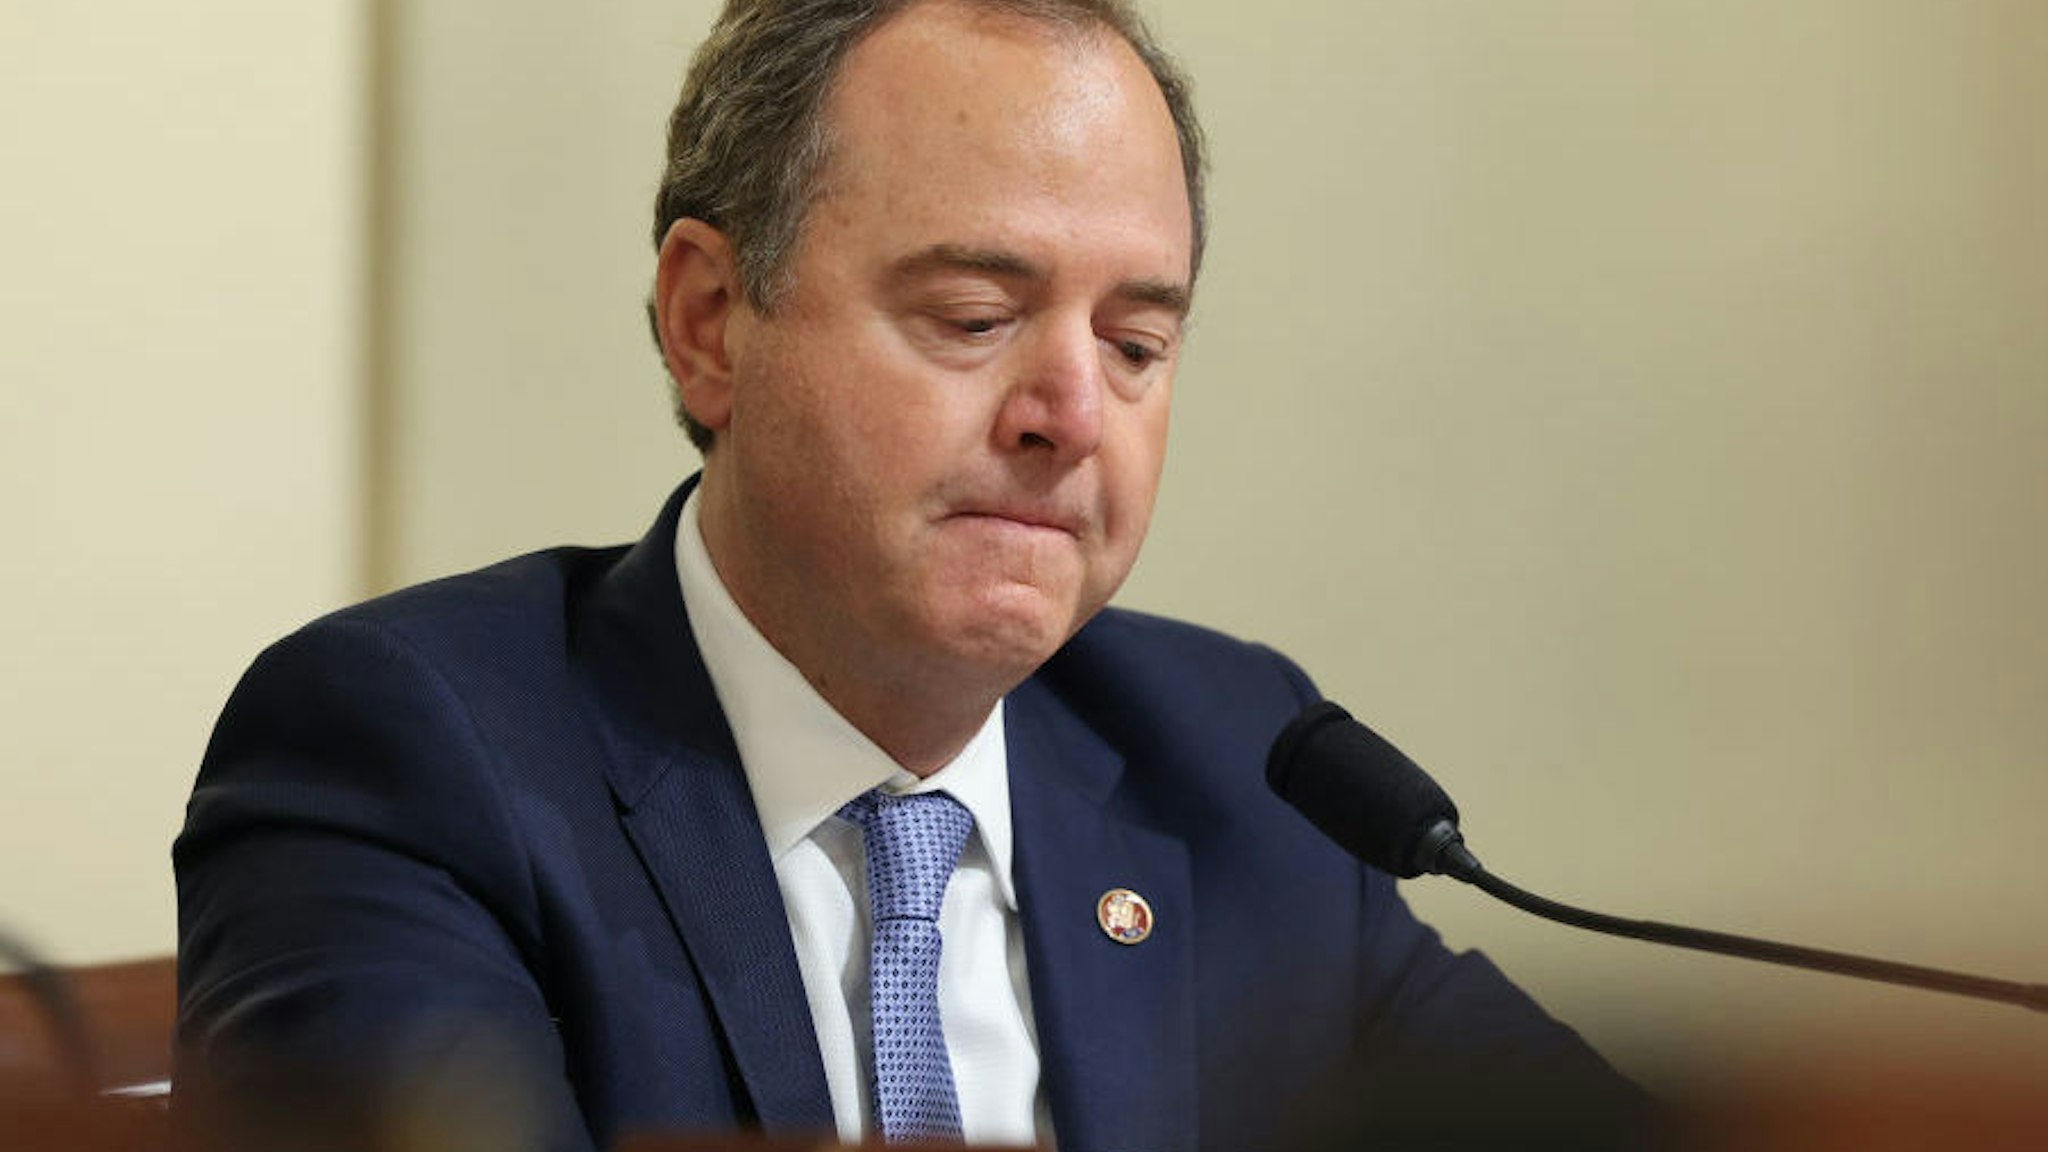 Rep. Adam Schiff (D-CA) gets emotional as he speaks during the House Select Committee hearing investigating the January 6 attack on US Capitol on July 27, 2021 at the U.S. Capitol in Washington, DC.